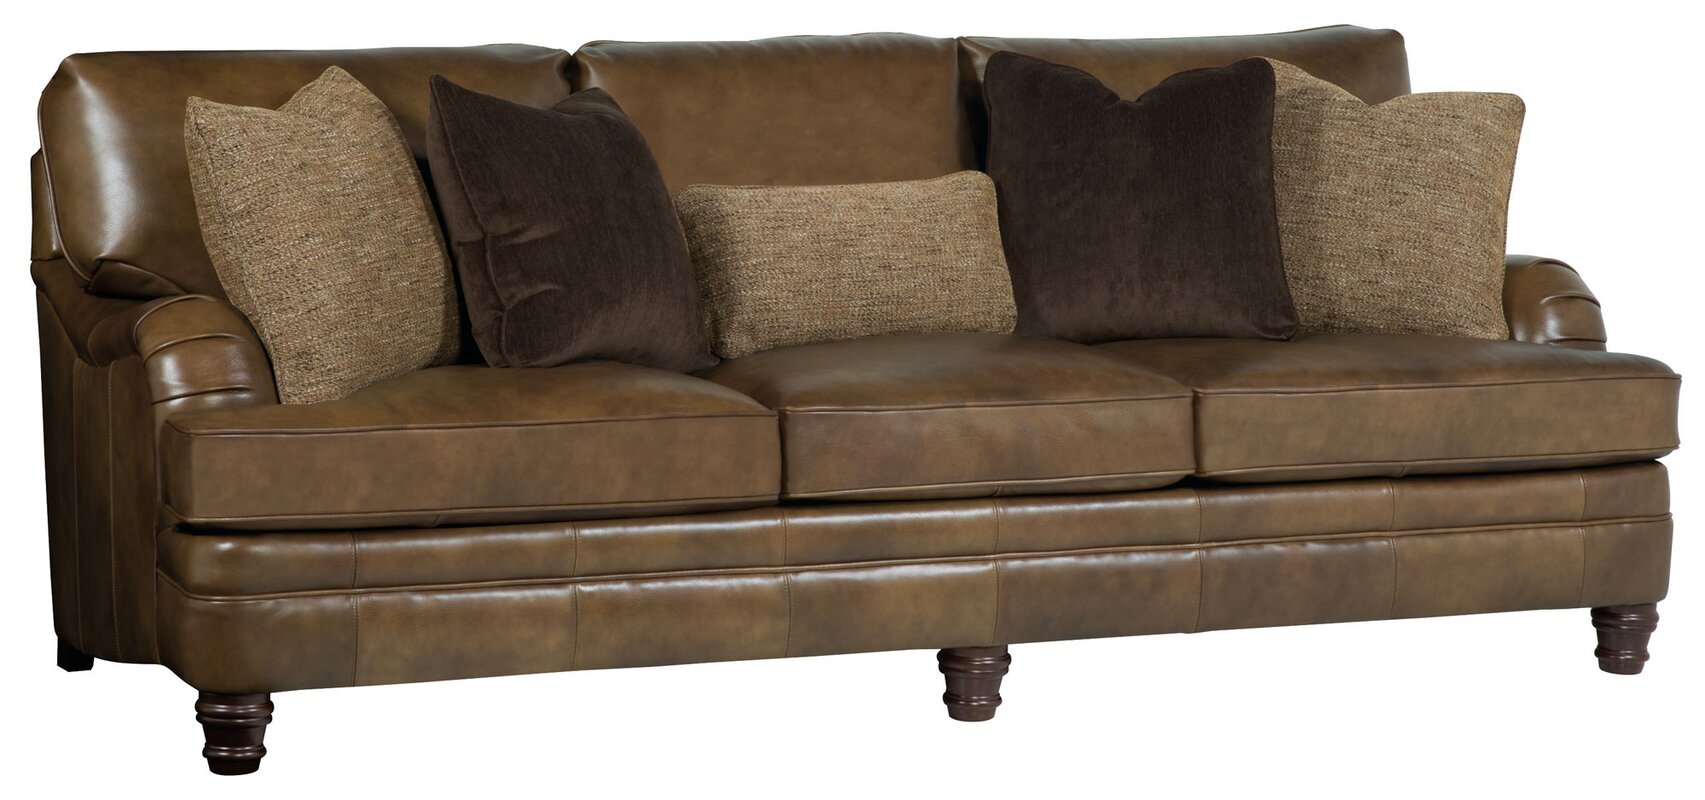 tarleton collection leather sofa 7077l and loveseat 7075l